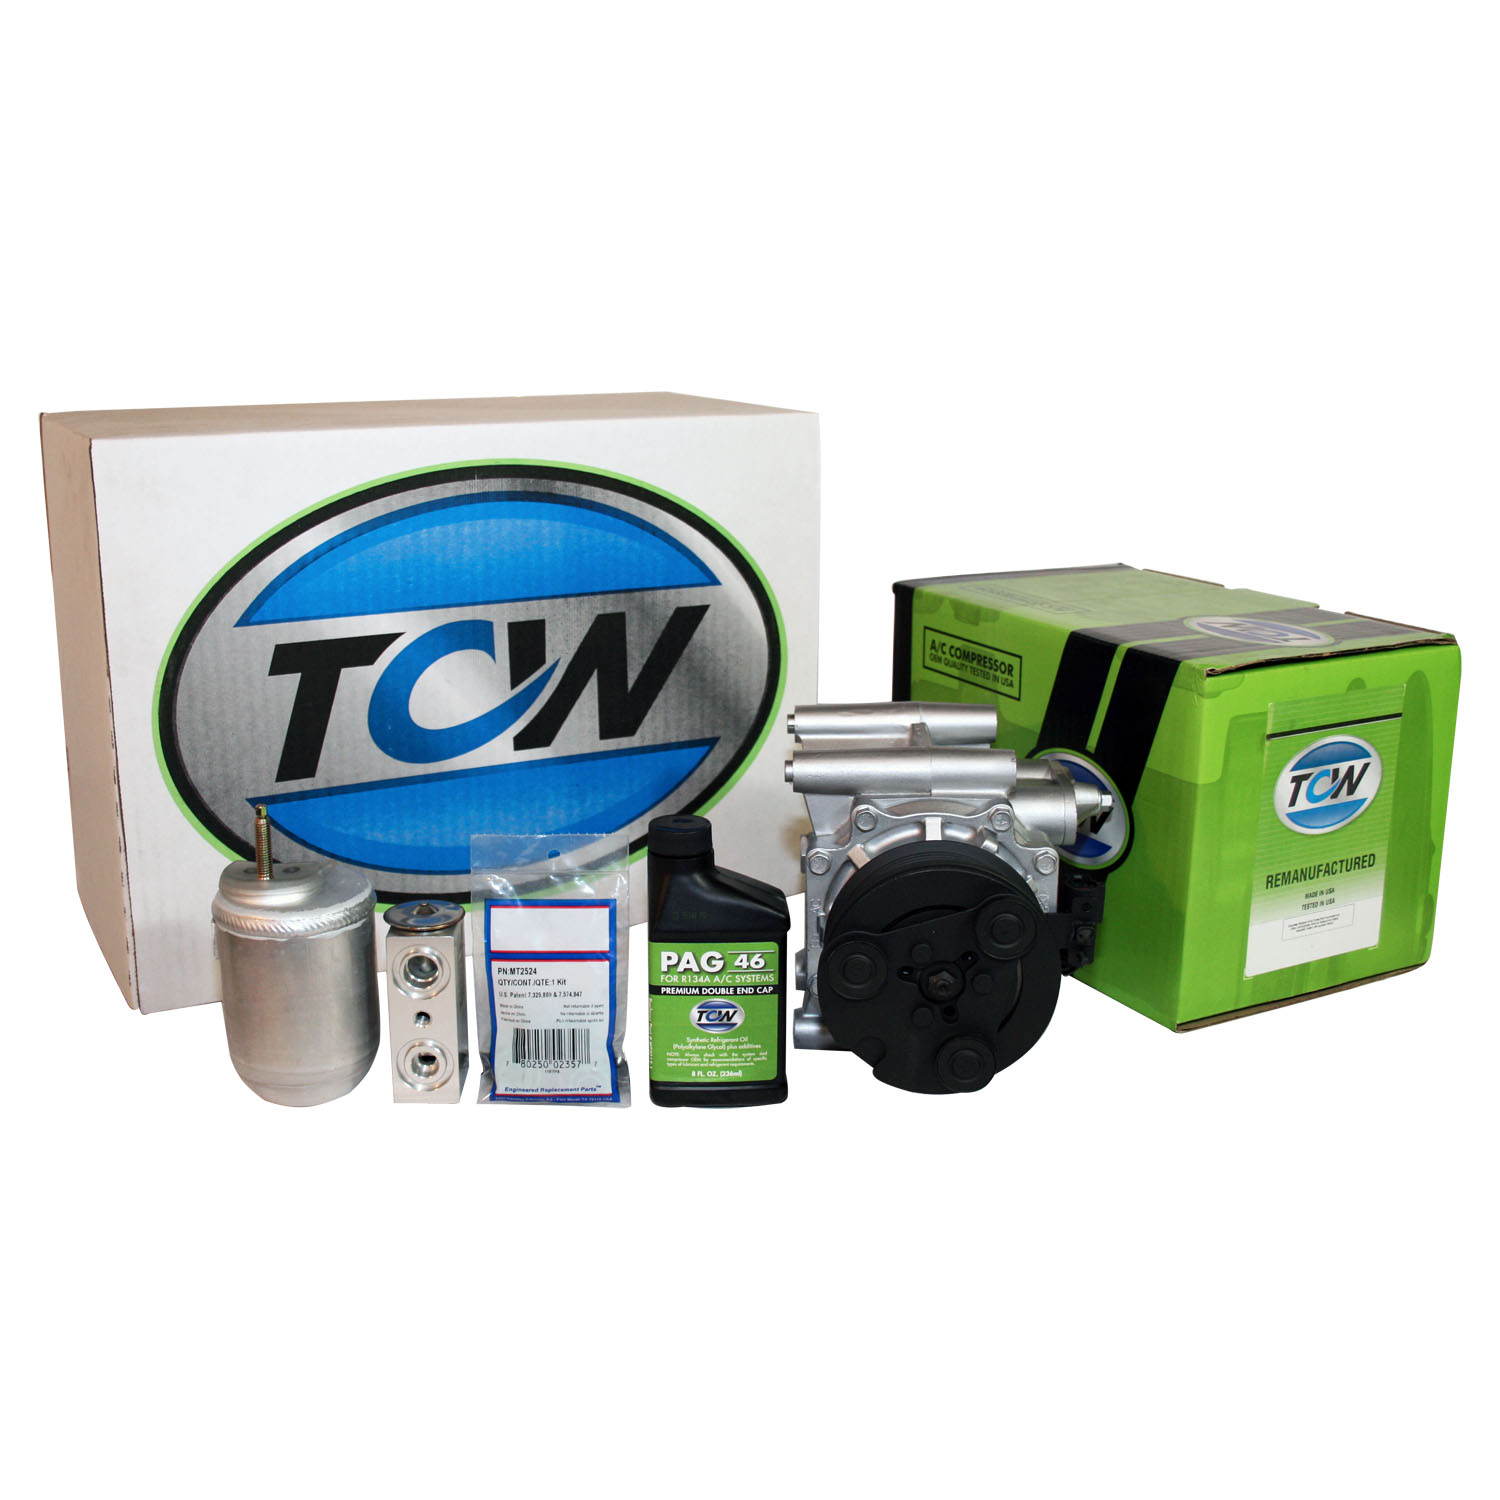 TCW Vehicle A/C Kit K1000248R Remanufactured Product Image field_60b6a13a6e67c